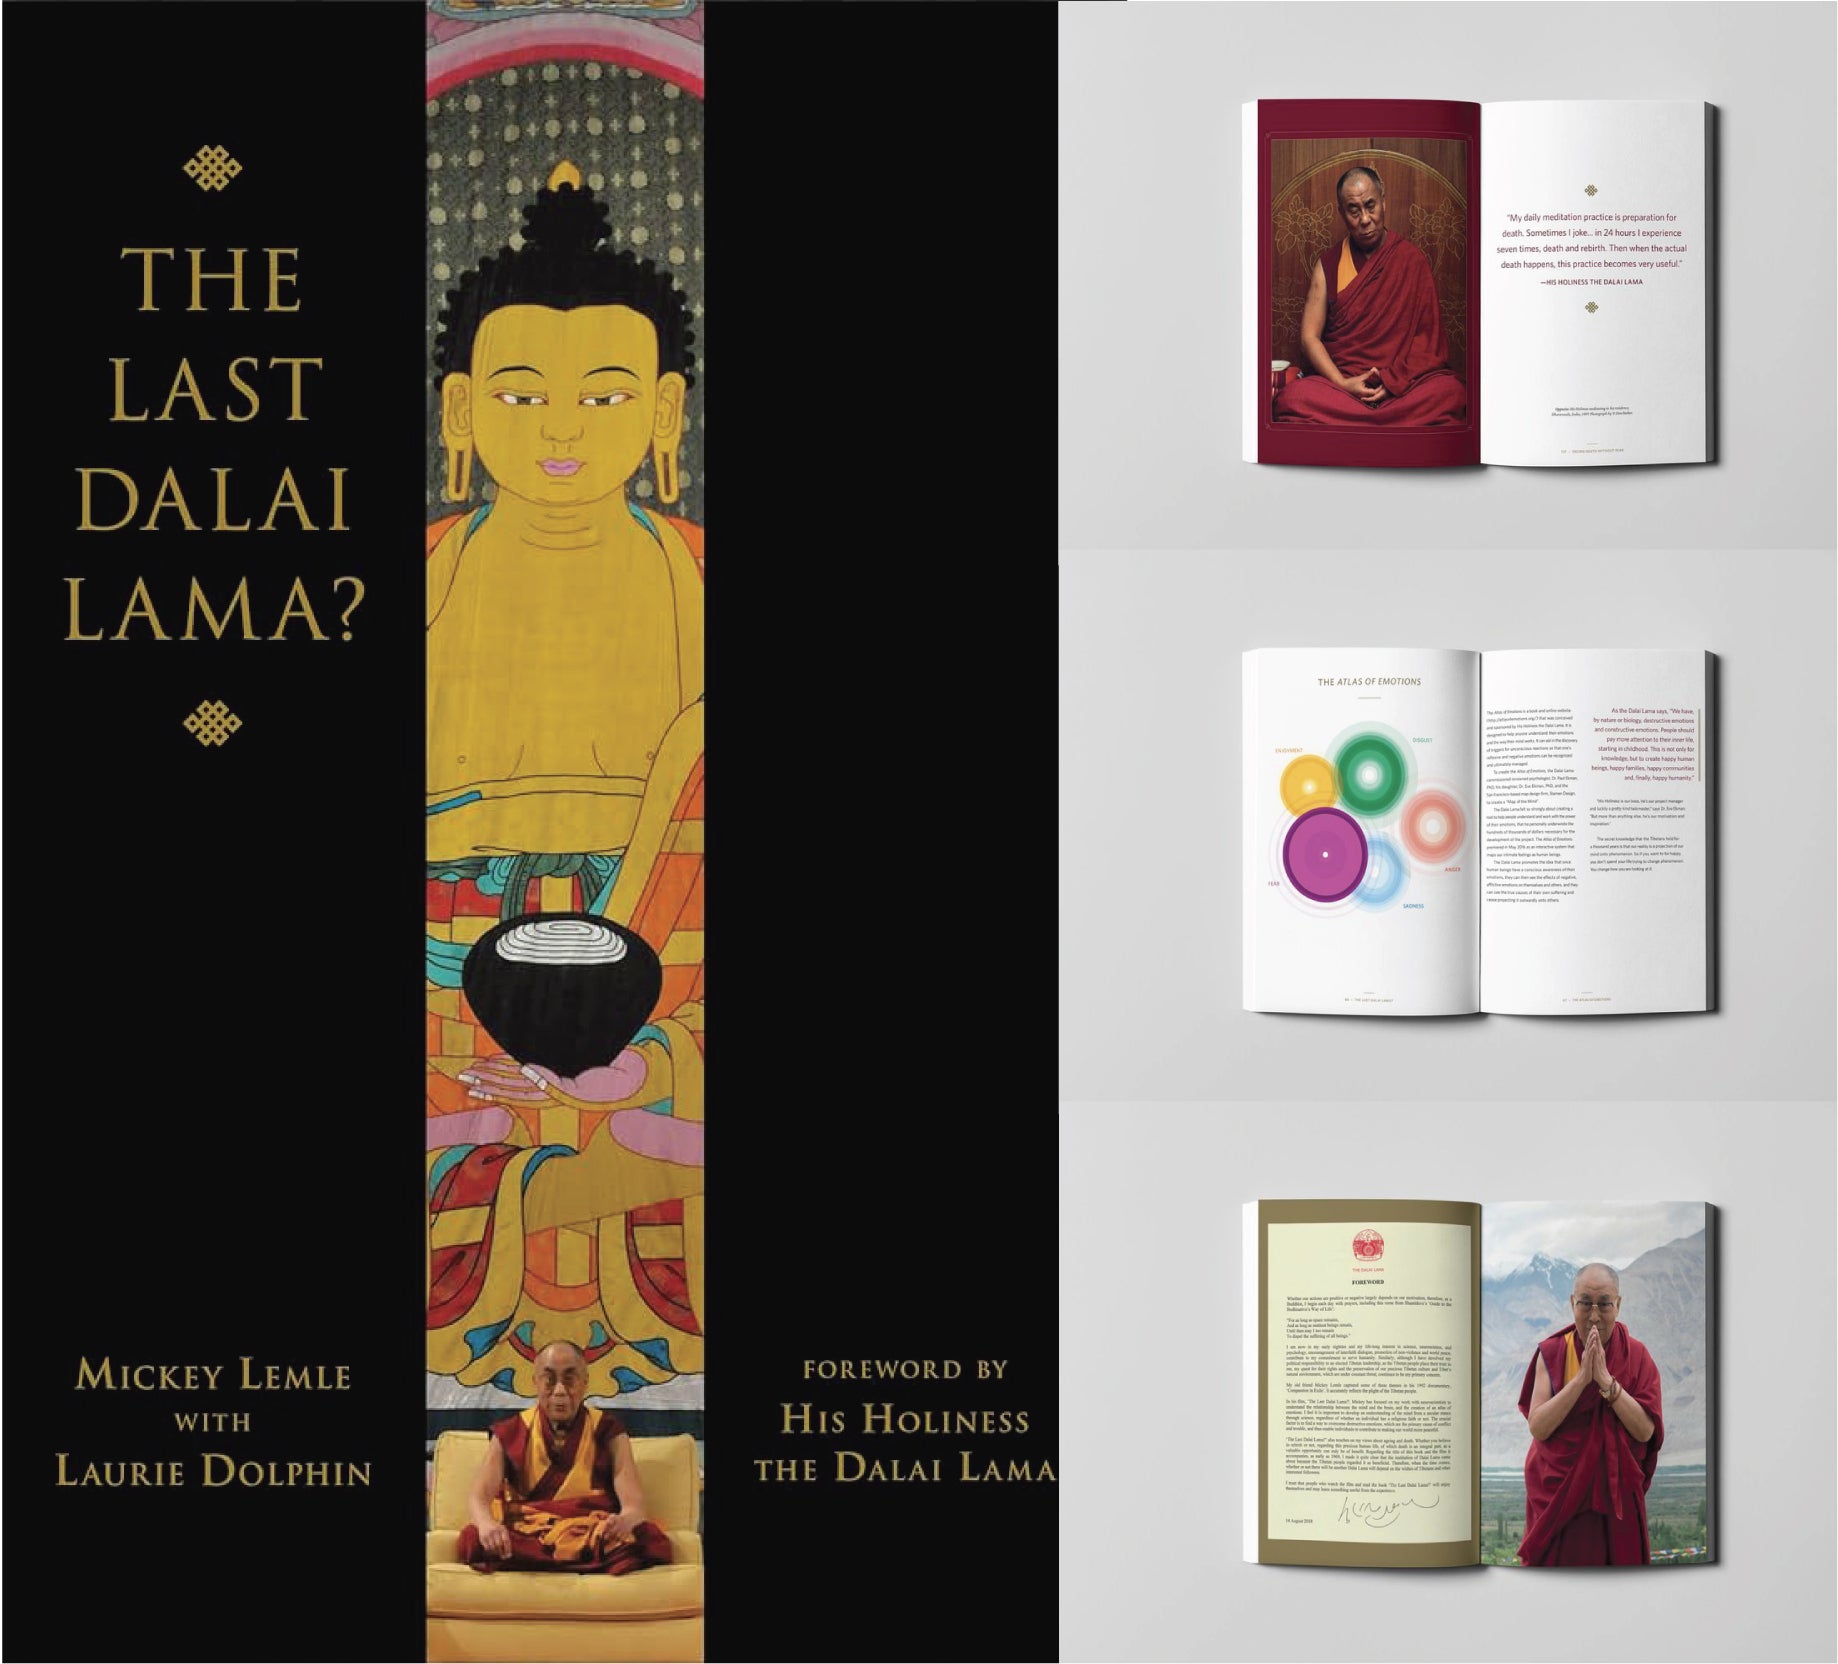 The Last Dalai Lama?  By Mickey Lemle with Laurie Dolphin